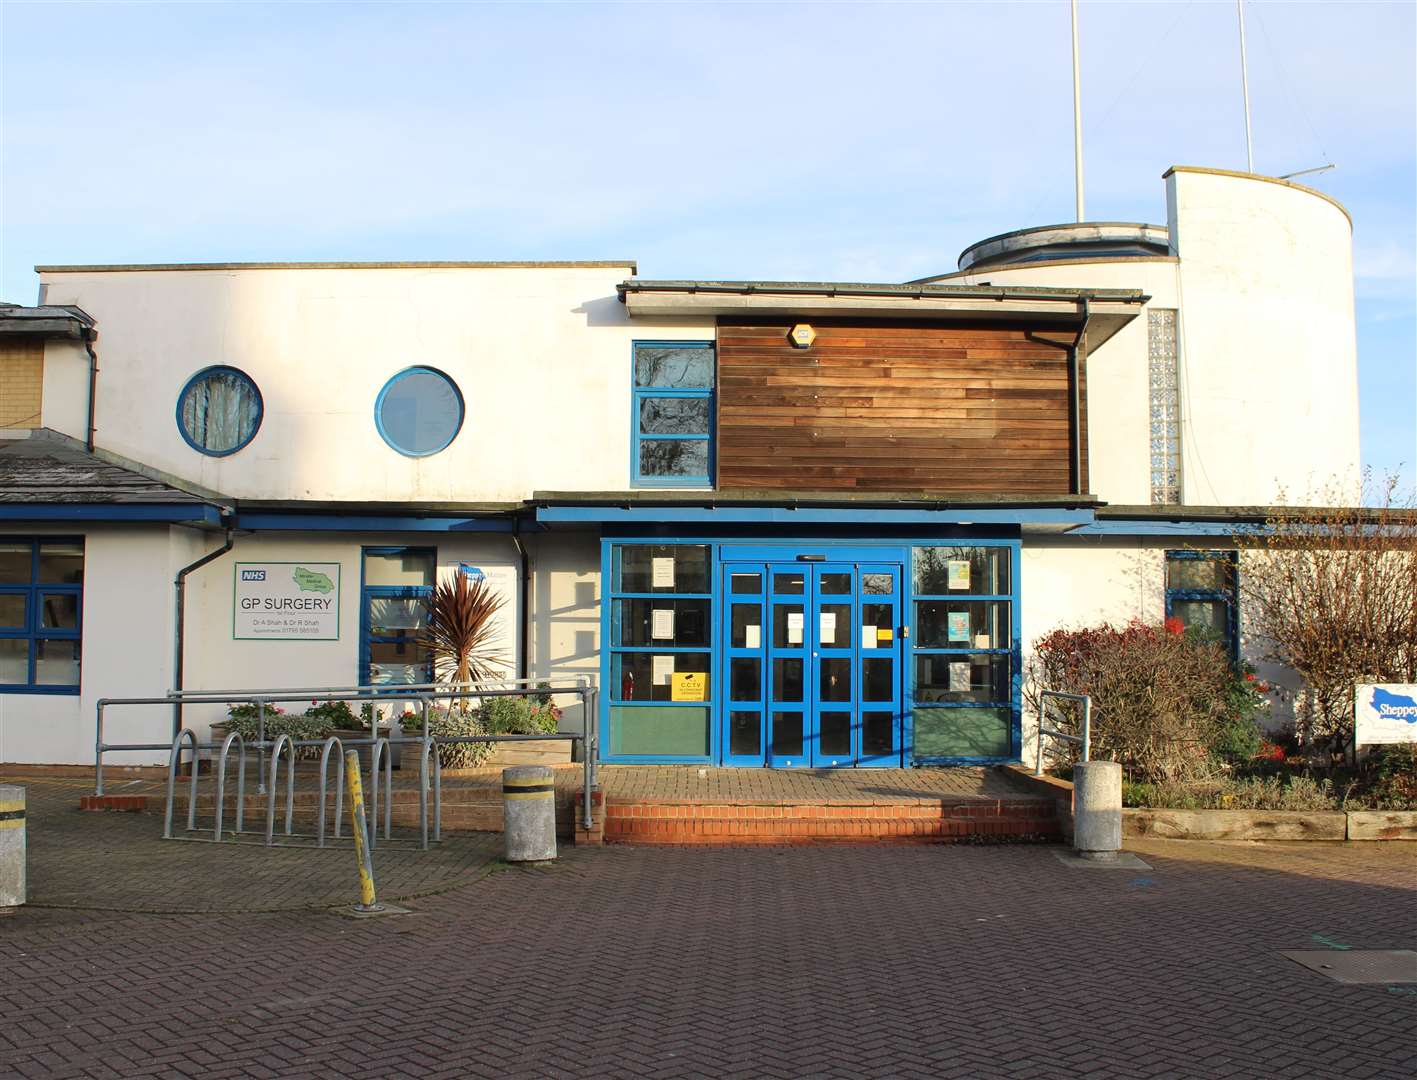 Residents in Sheerness will be given the chance to have their say on plans to transform the Healthy Living Centre at Beachfields. Photo: Swale Borough Council